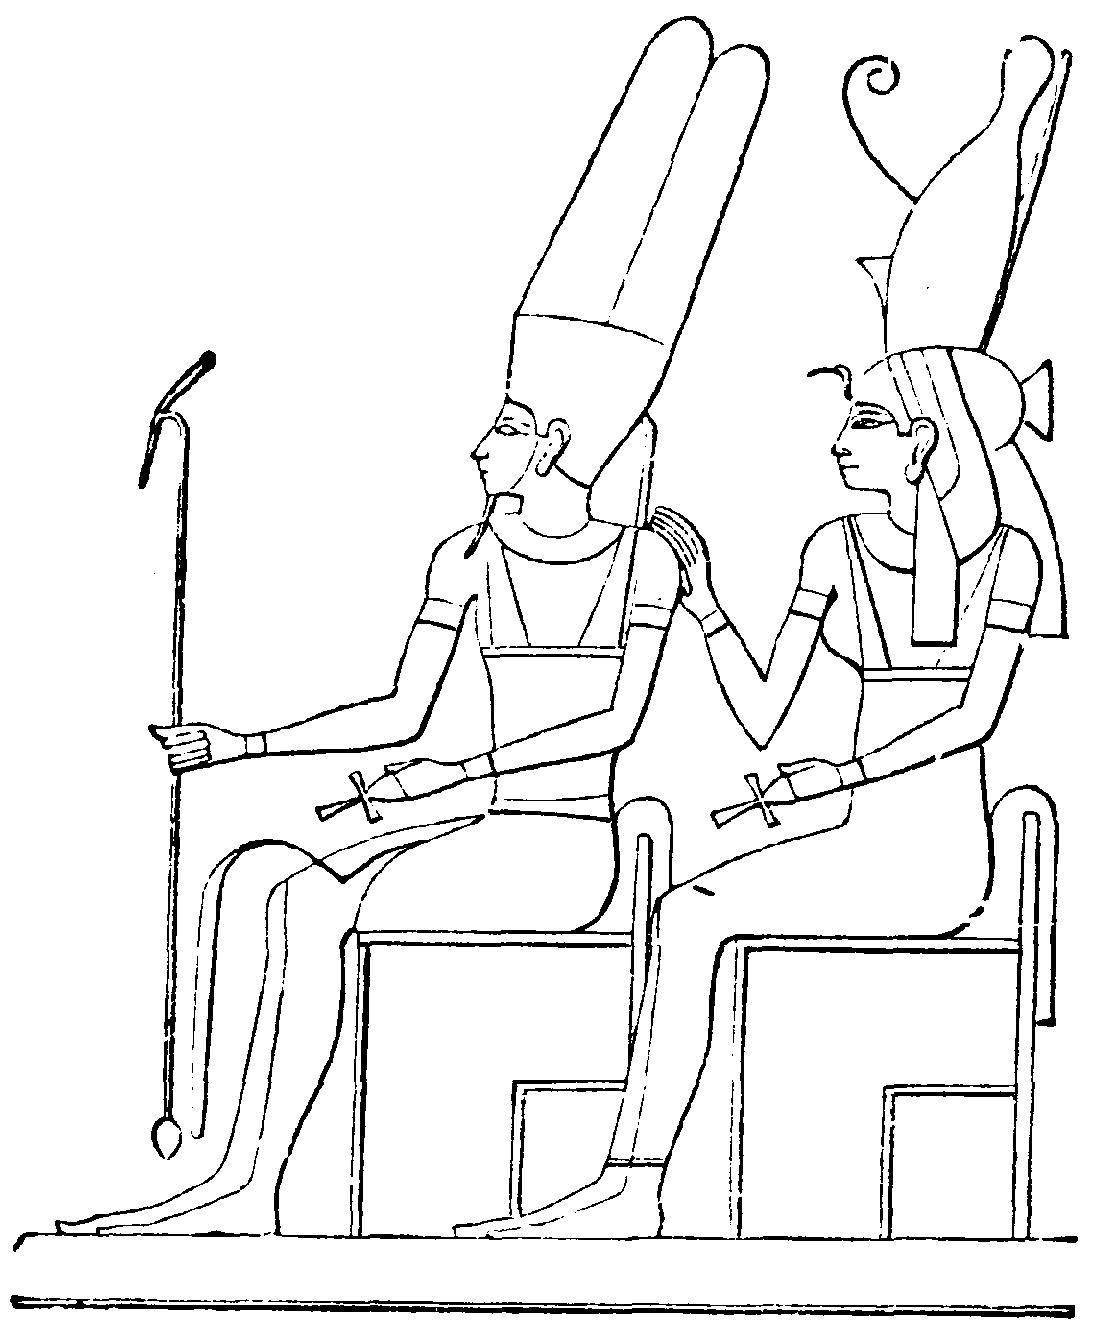 Coloring The figure of the Pharaoh. Category Egypt. Tags:  Egypt.